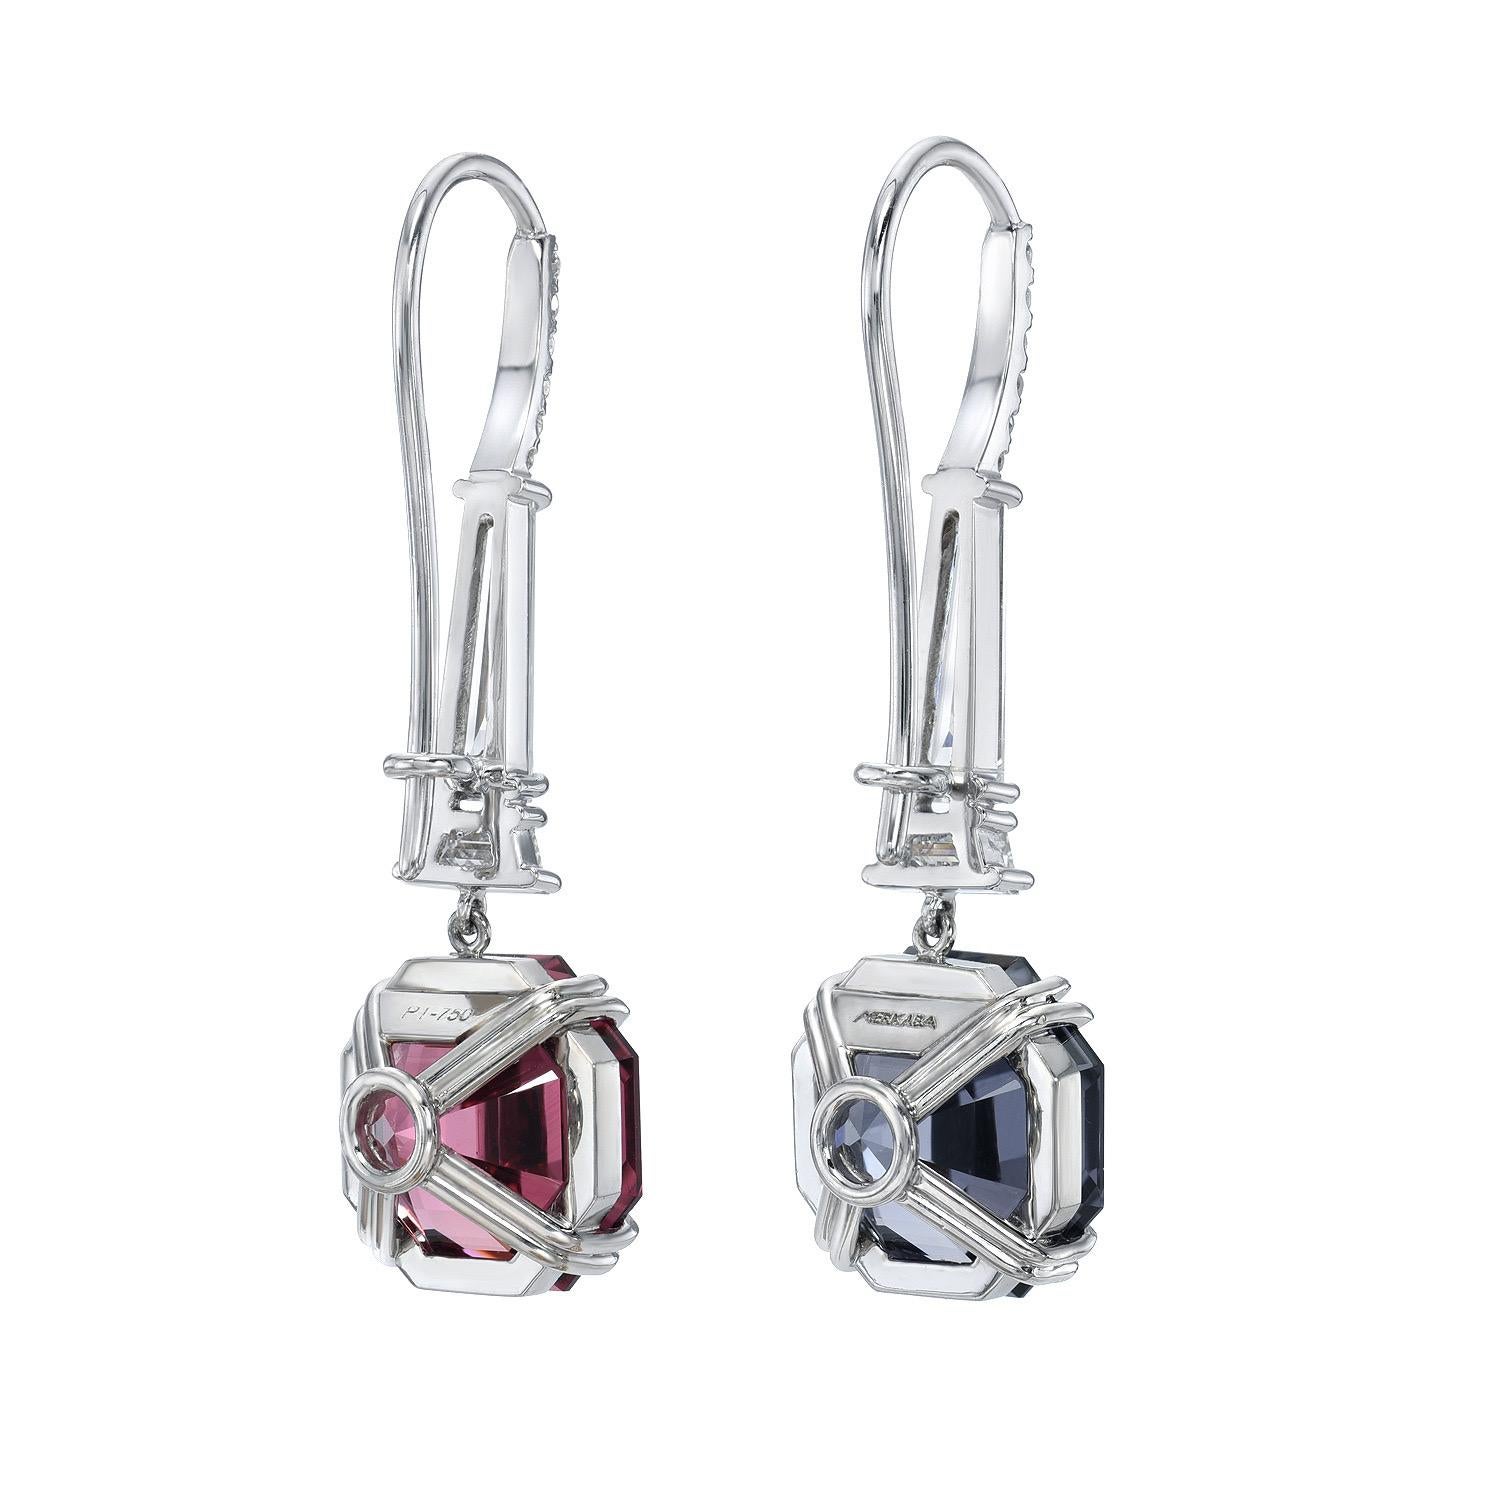 Rare and Exceptional 10.24 carat, Blue-Gray and Raspberry Spinel square octagon earrings, decorated with a total of 0.62 carat G/VS1 tapered baguette diamonds, a pair of 0.27 carat E/VS1 trapezoid diamonds, and a total of 0.15 carat round single cut